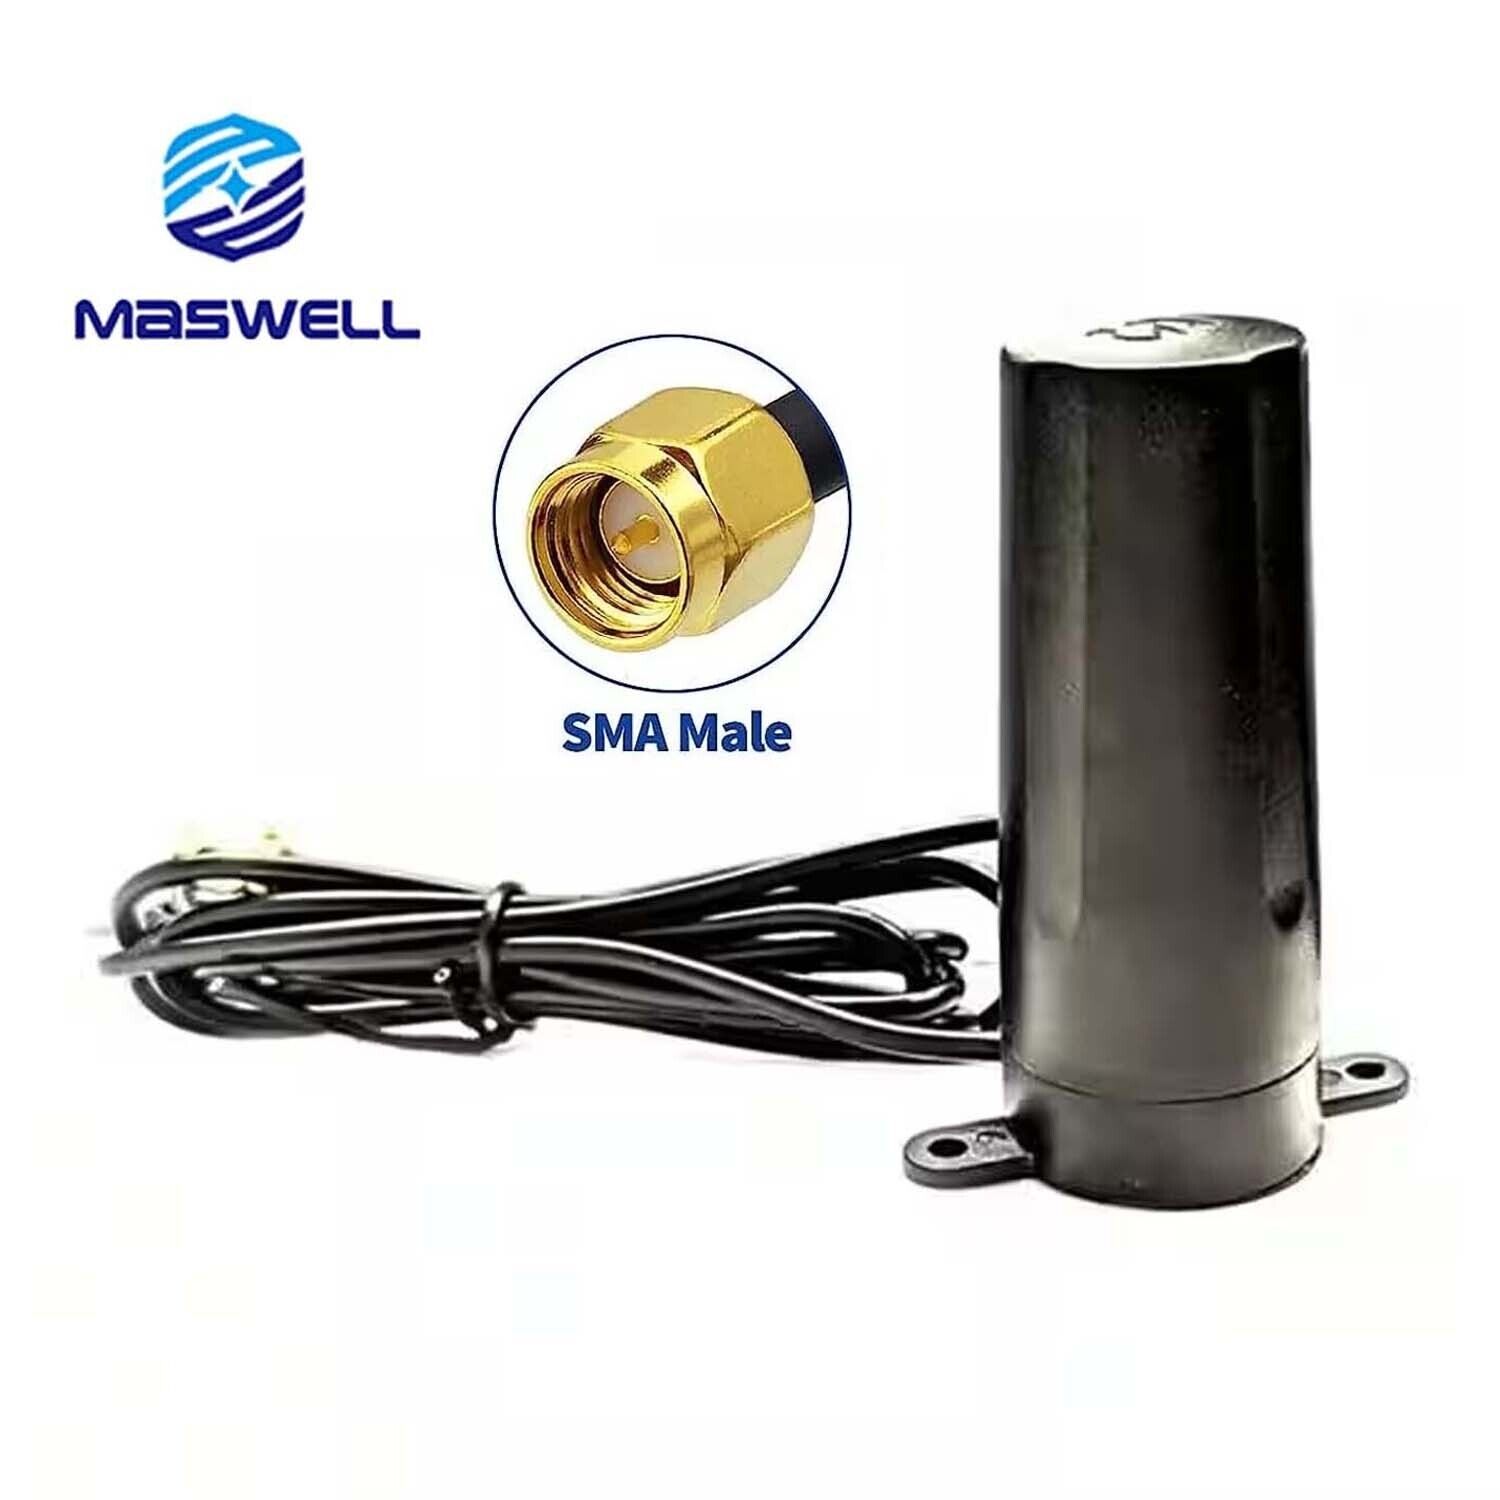 Cellular 3G 4G 5G NR External Antenna M2M IoT with WiFi 6 Bluetooth SMA-Male 